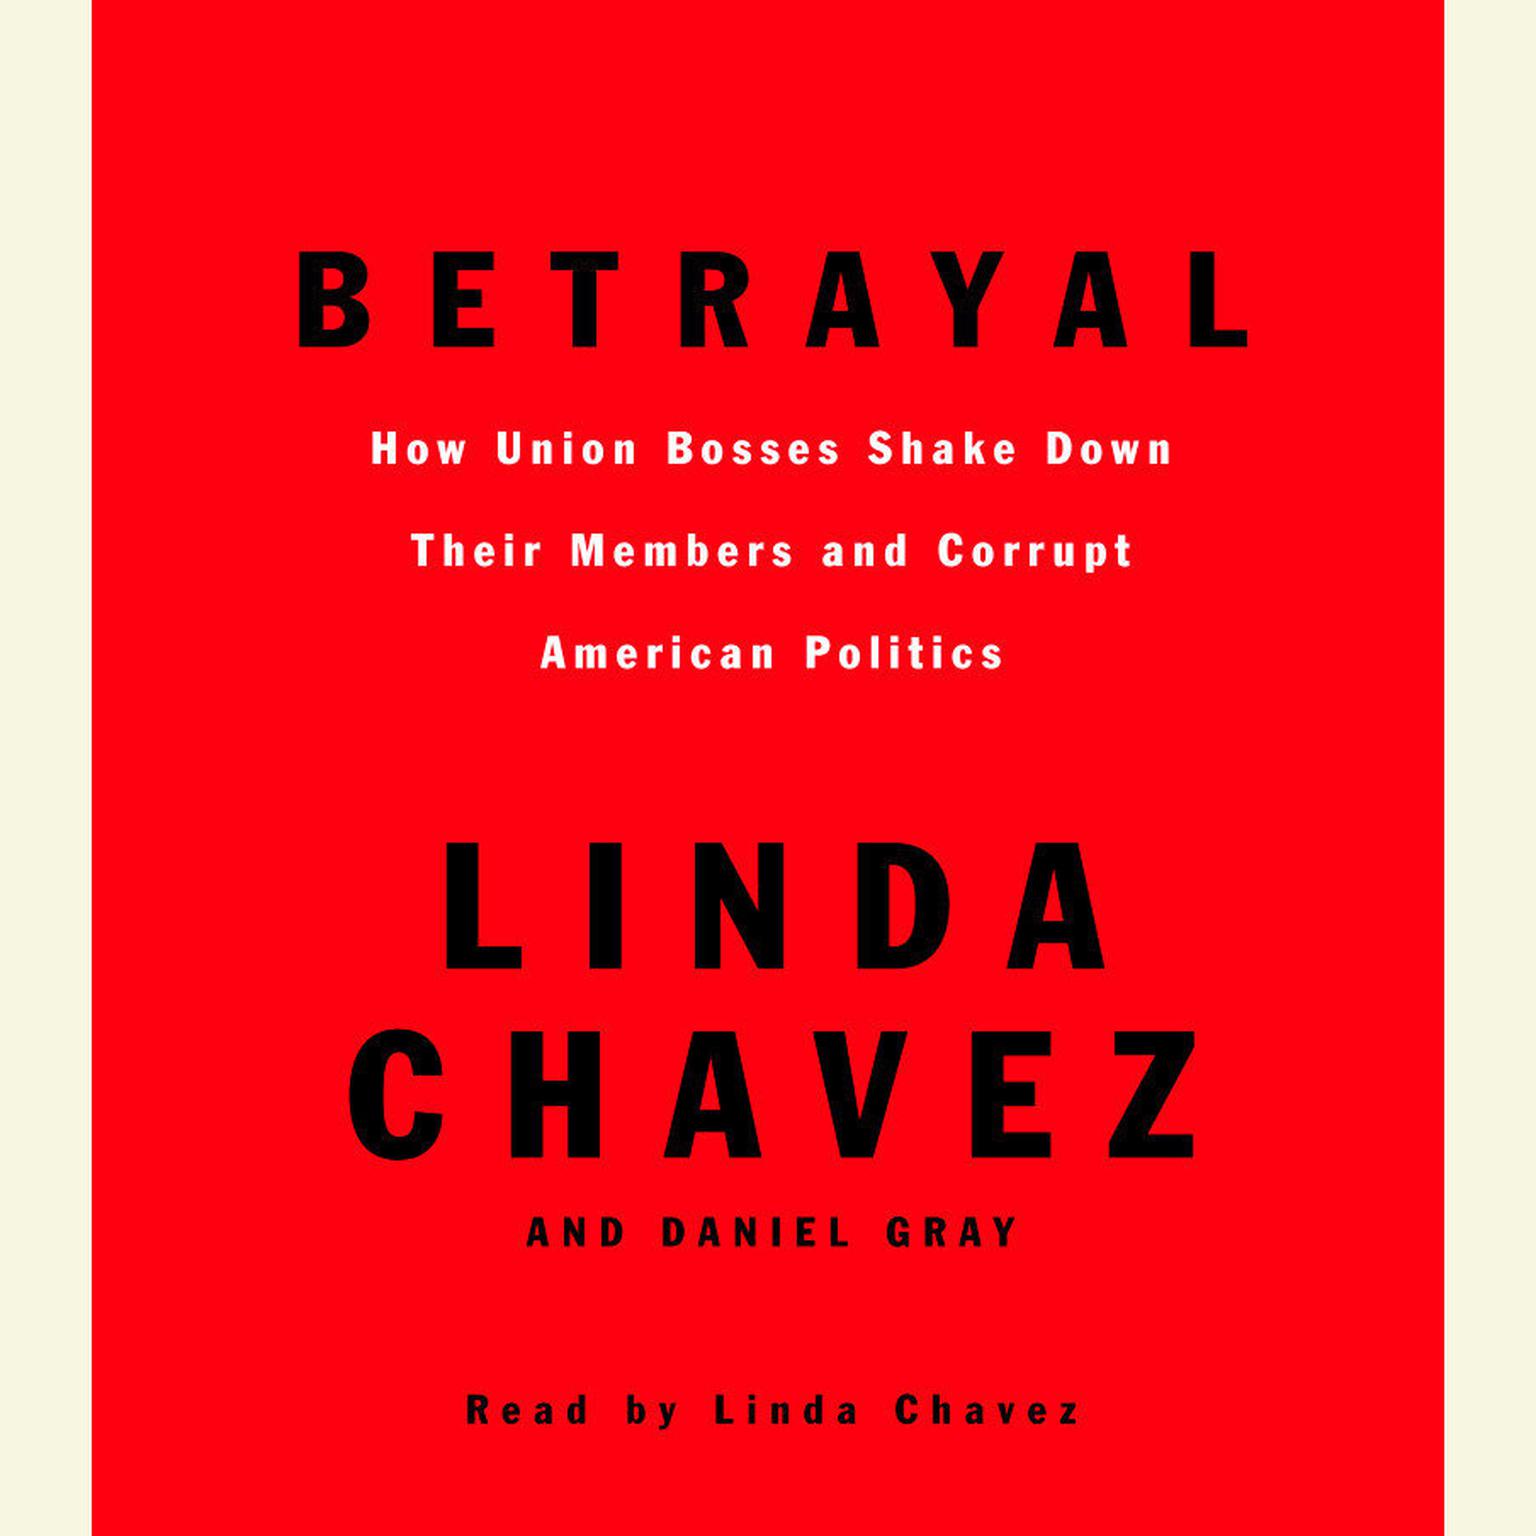 Betrayal (Abridged): How Union Bosses Shake Down Their Members and Corrupt American Politics Audiobook, by Linda Chavez